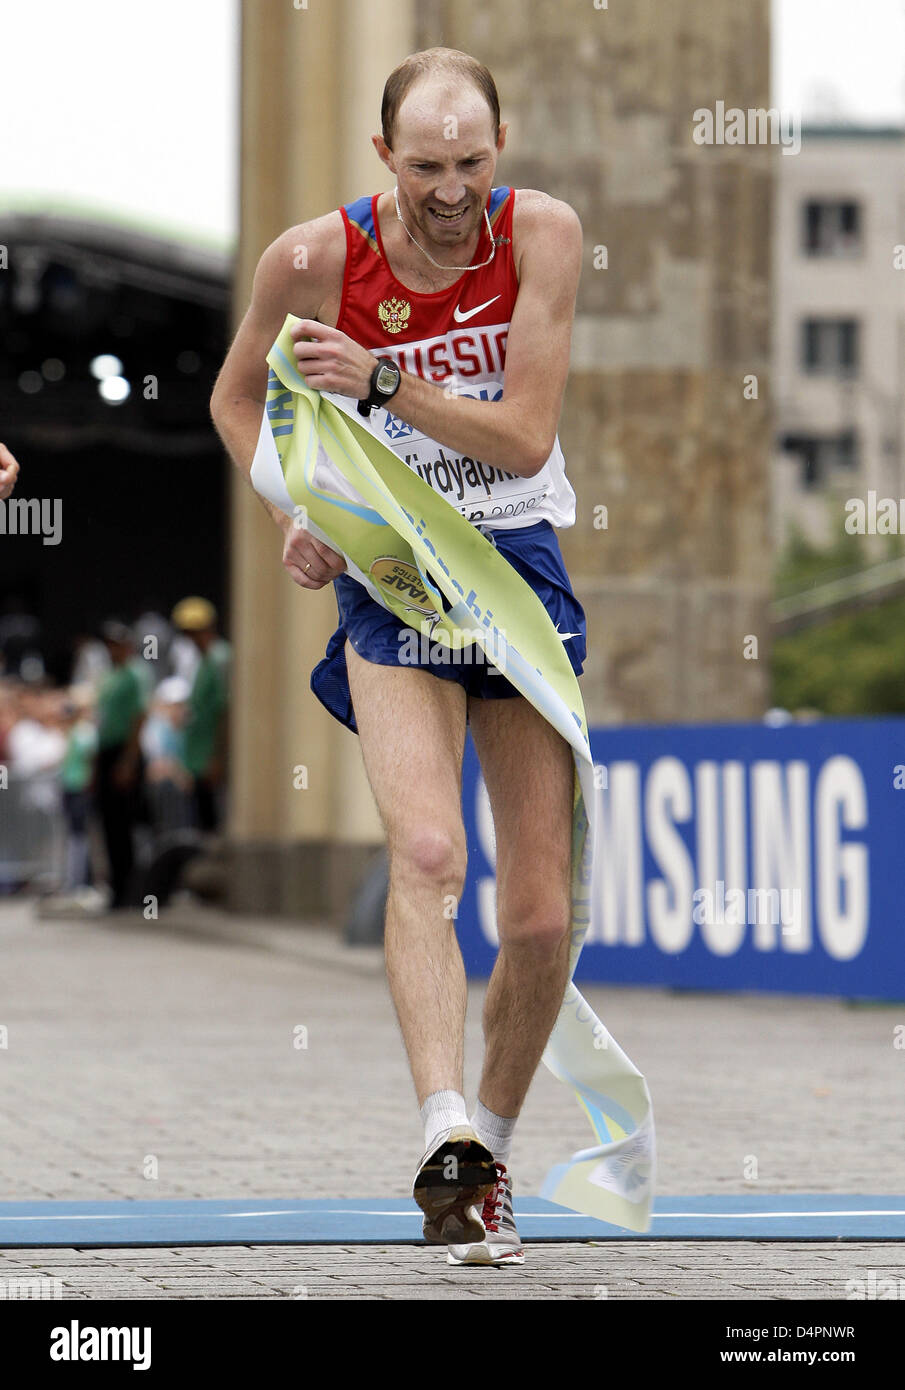 Russian athlete Sergey Kirdyapkin wins the 50km Walk at the 12th IAAF World Championships in Athletics, Berlin, Germany, 21 August 2009. Photo: Jens Buettner Stock Photo